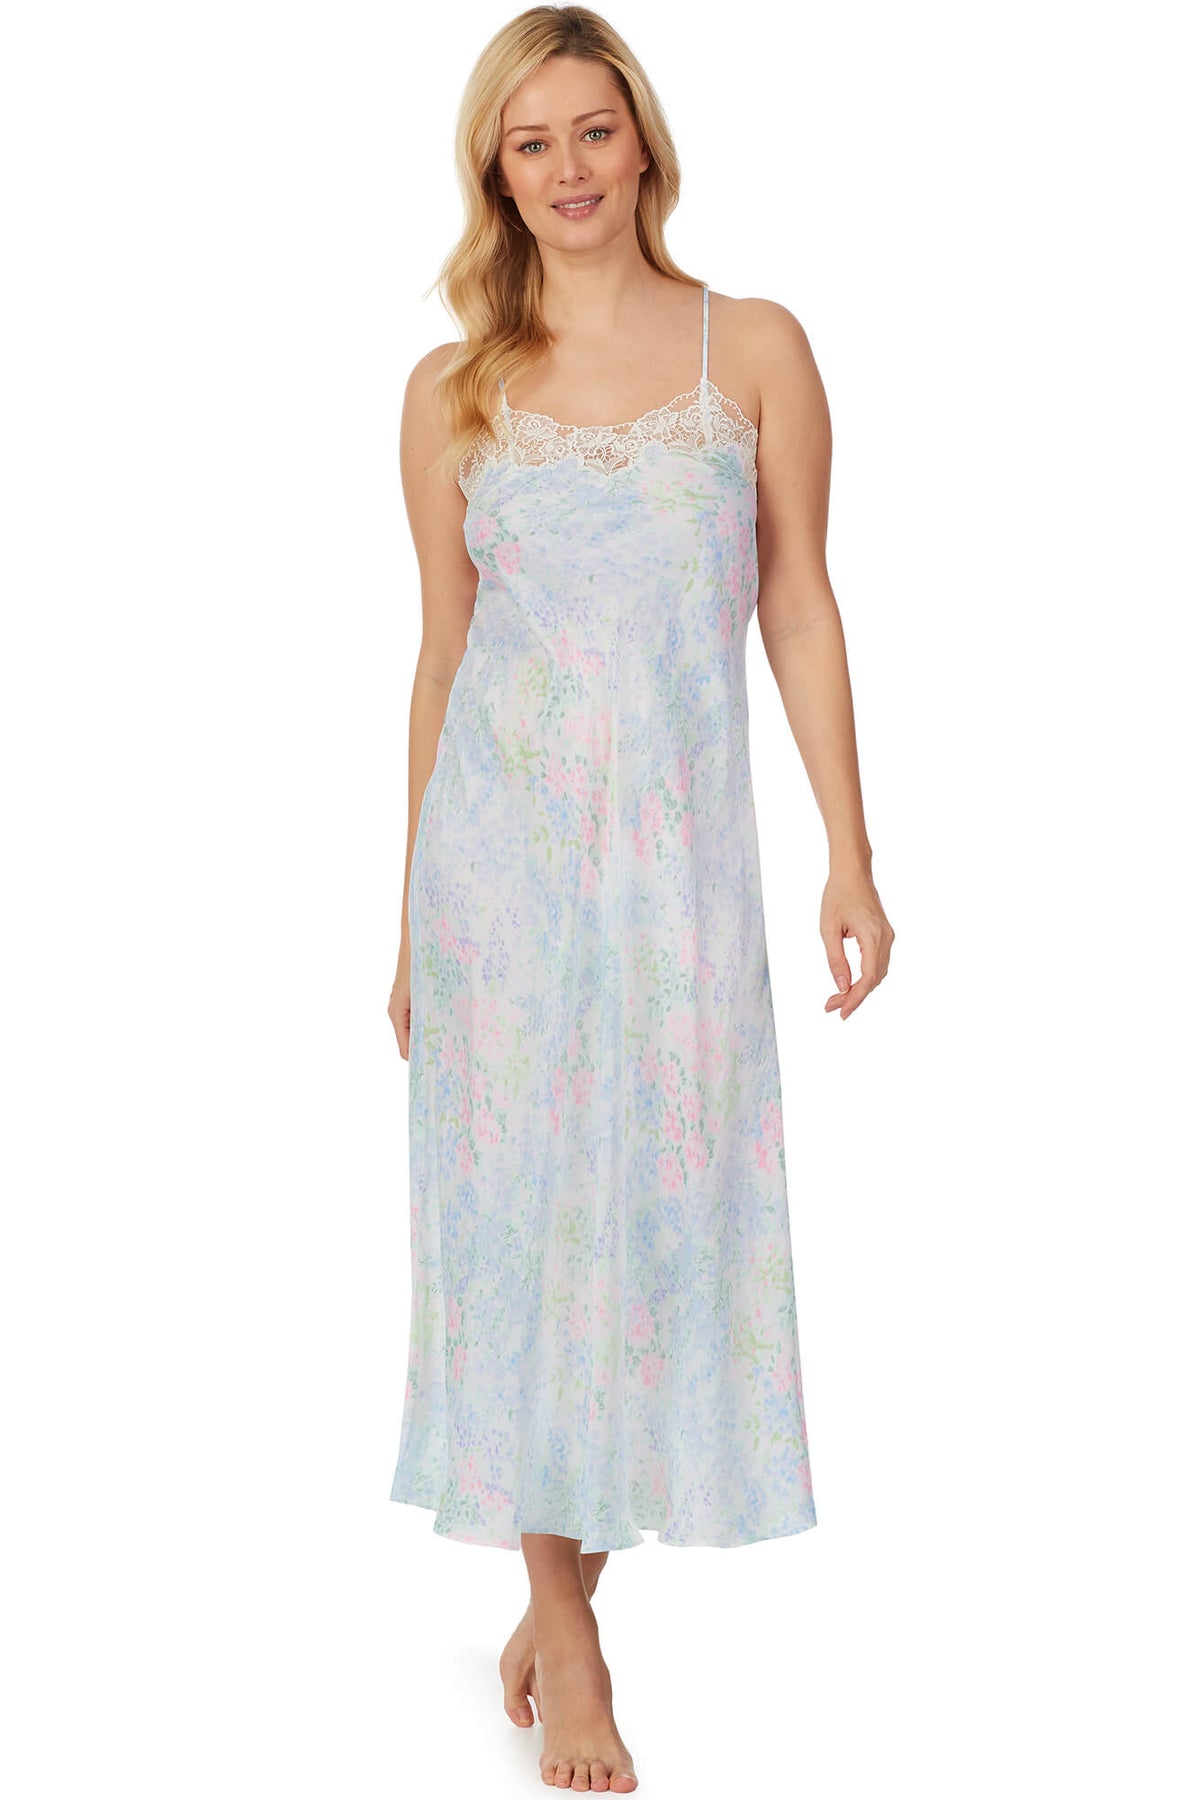 A lady wearing watercolor sleeveless santorini satin gown.